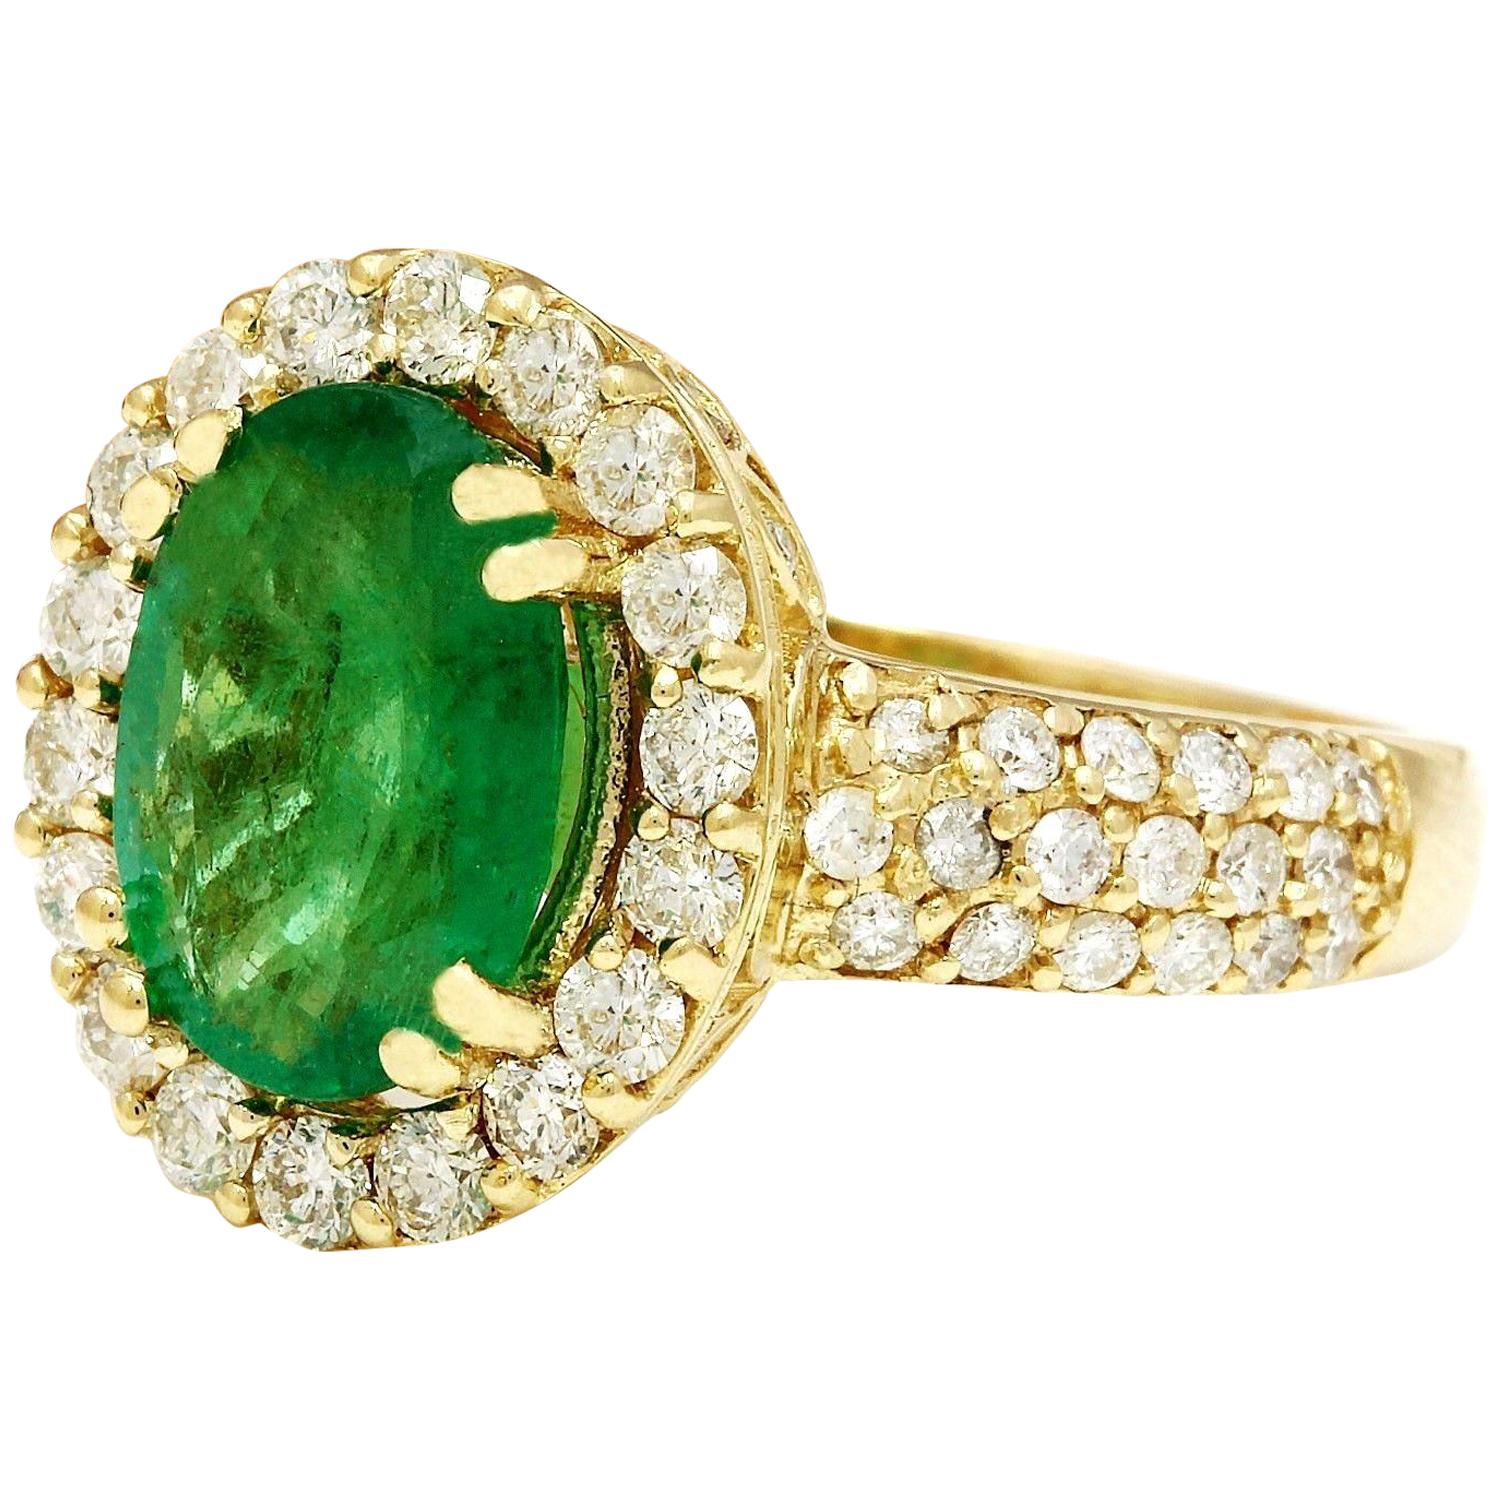 3.78 Carat Natural Emerald 14K Solid Yellow Gold Diamond Ring
 Item Type: Ring
 Item Style: Engagement
 Material: 14K Yellow Gold
 Mainstone: Emerald
 Stone Color: Green
 Stone Weight: 2.50 Carat
 Stone Shape: Oval
 Stone Quantity: 1
 Stone